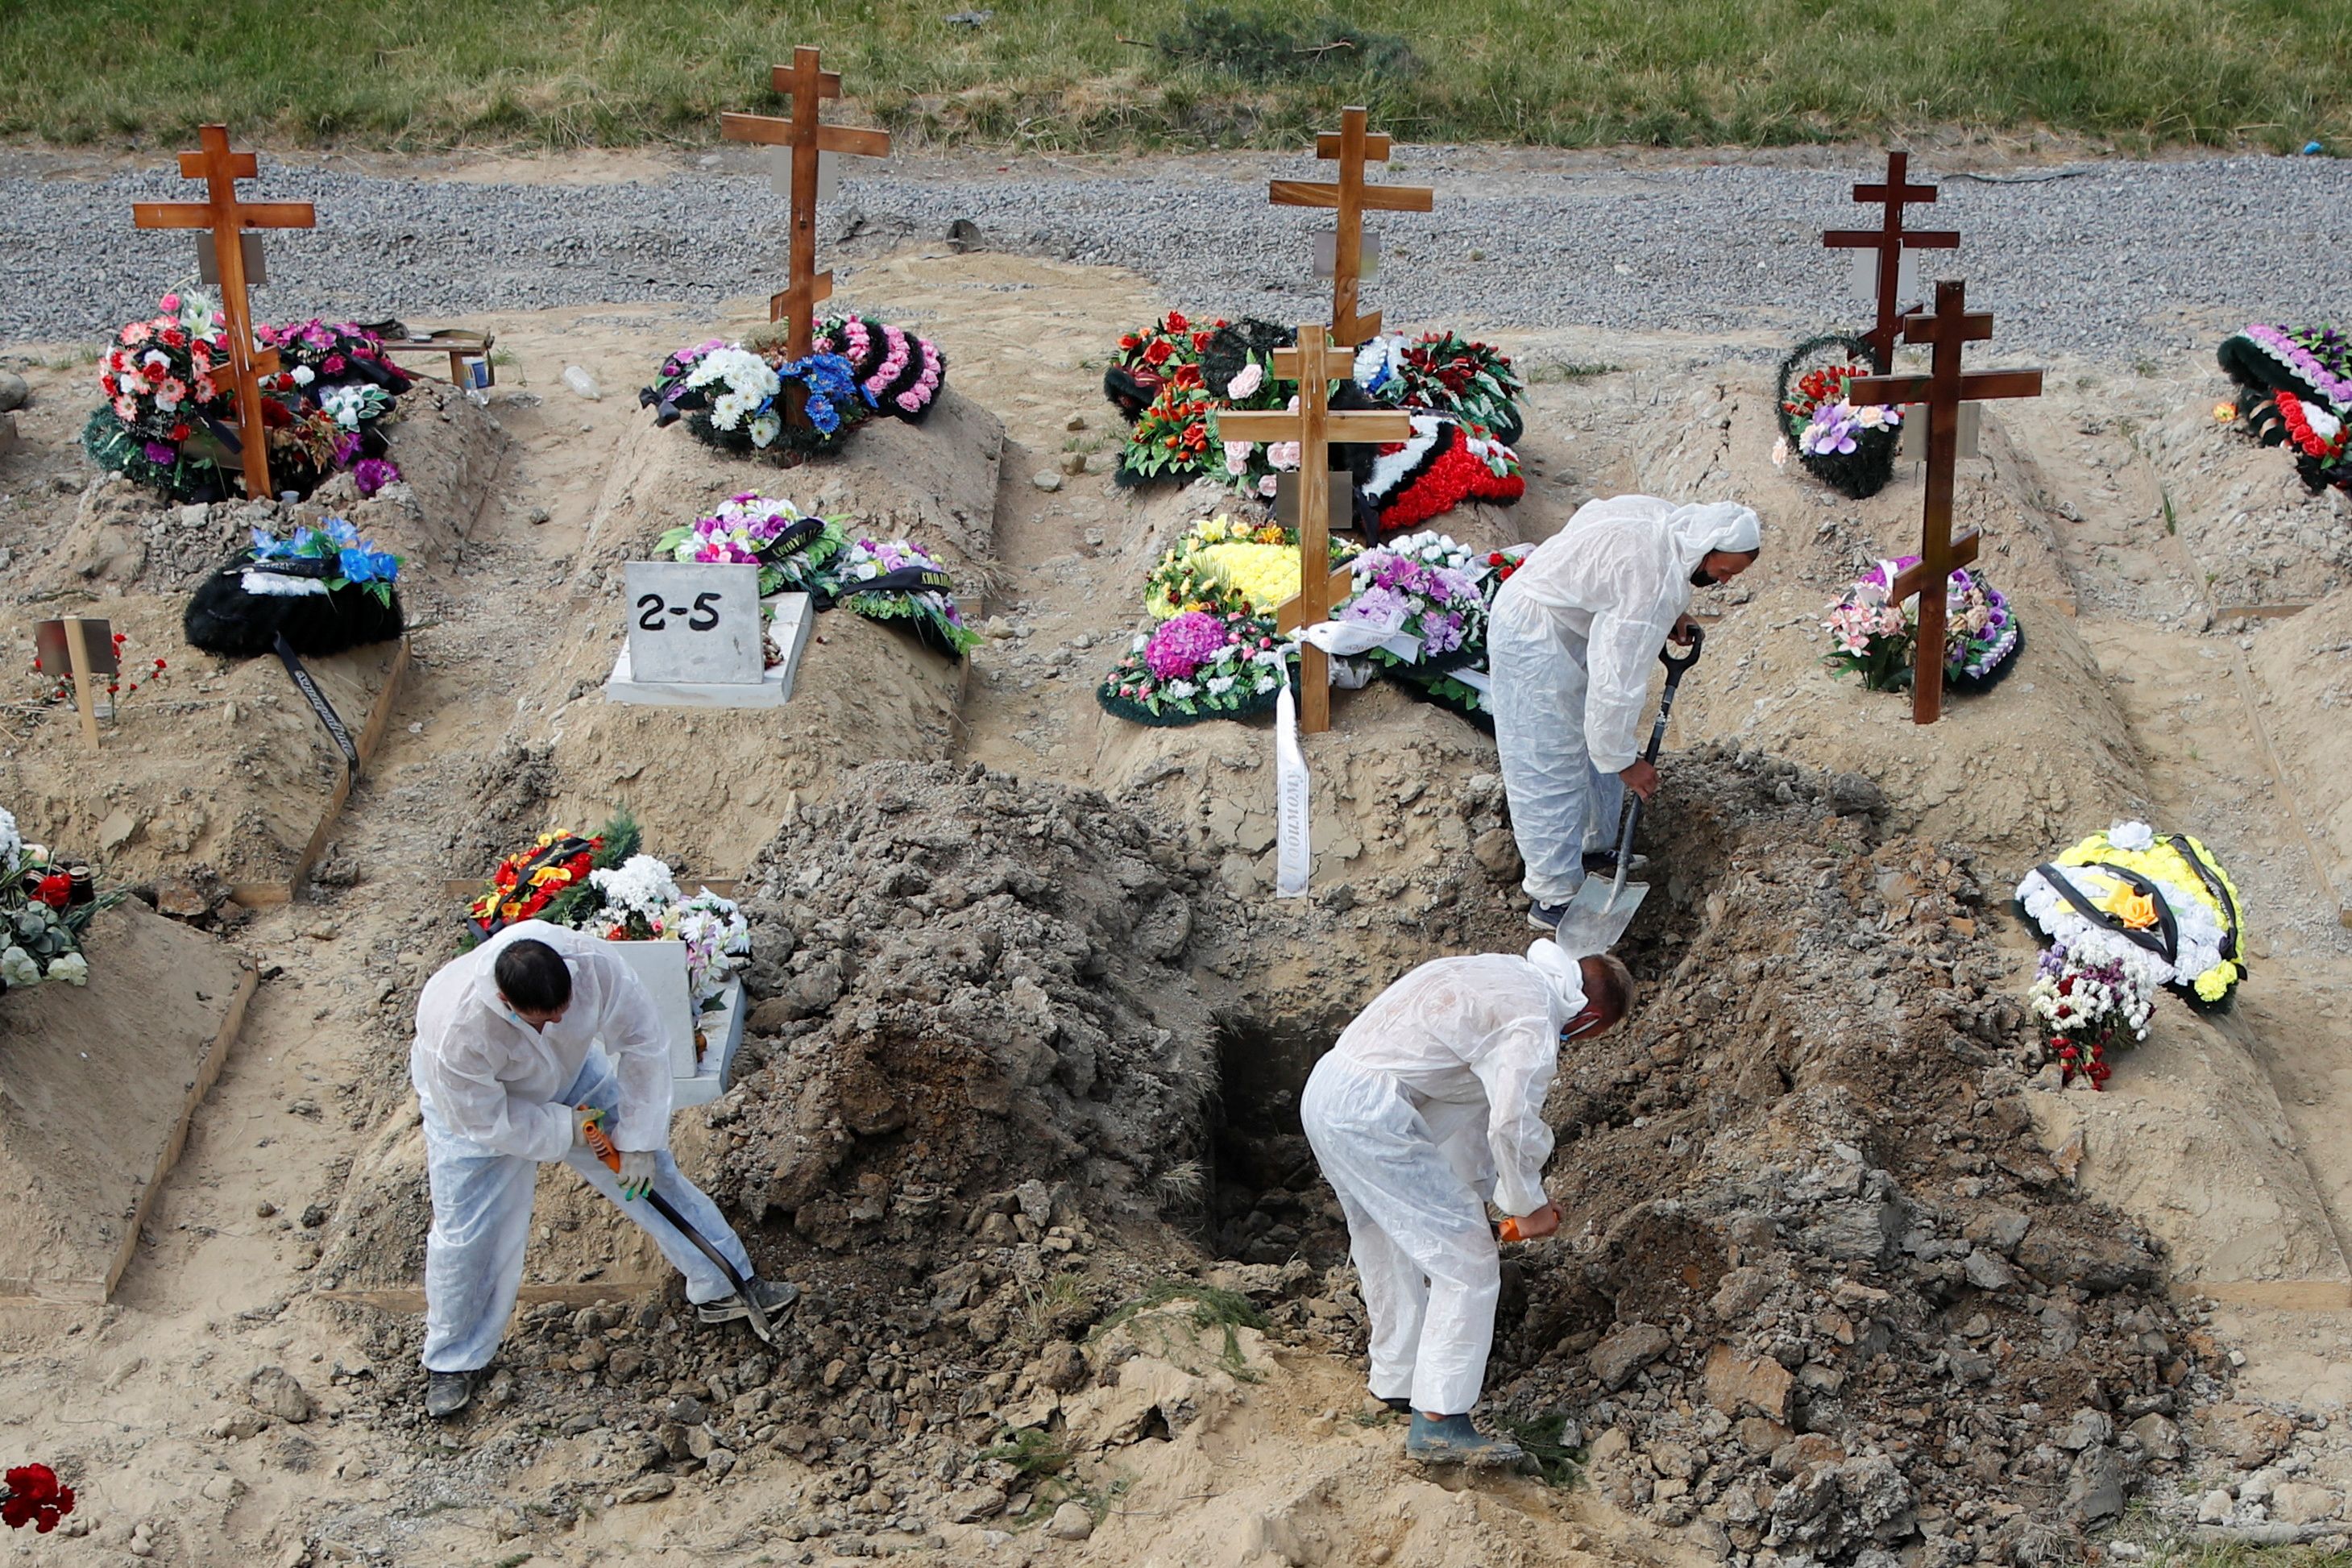 Grave diggers wearing personal protective equipment bury a person at a graveyard in Saint Petersburg